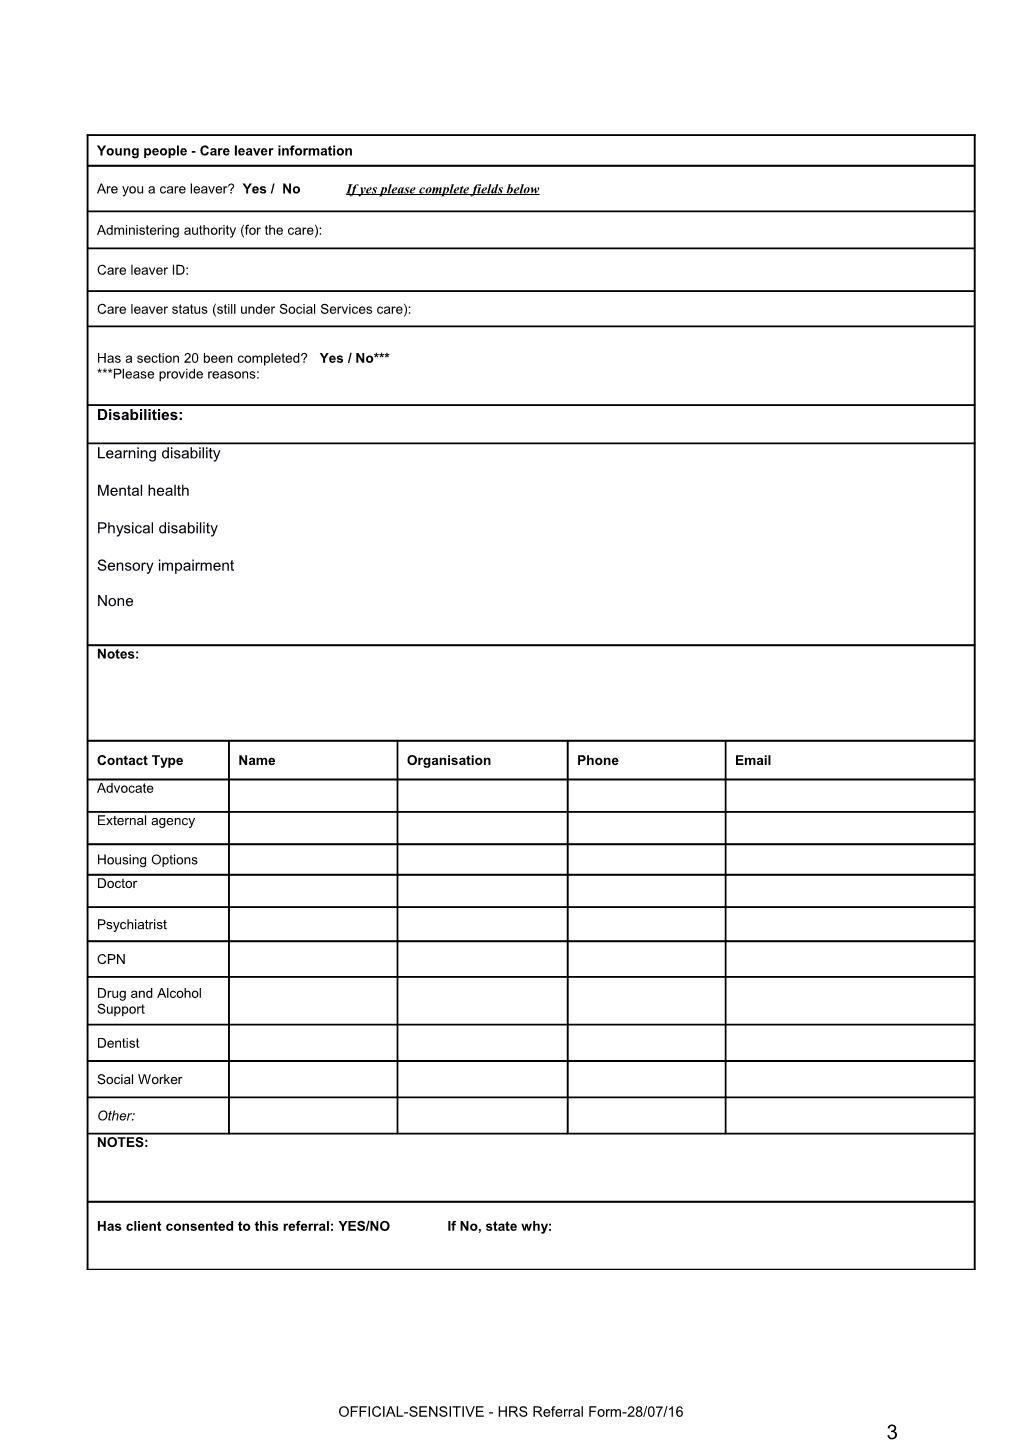 HRS Referral Form